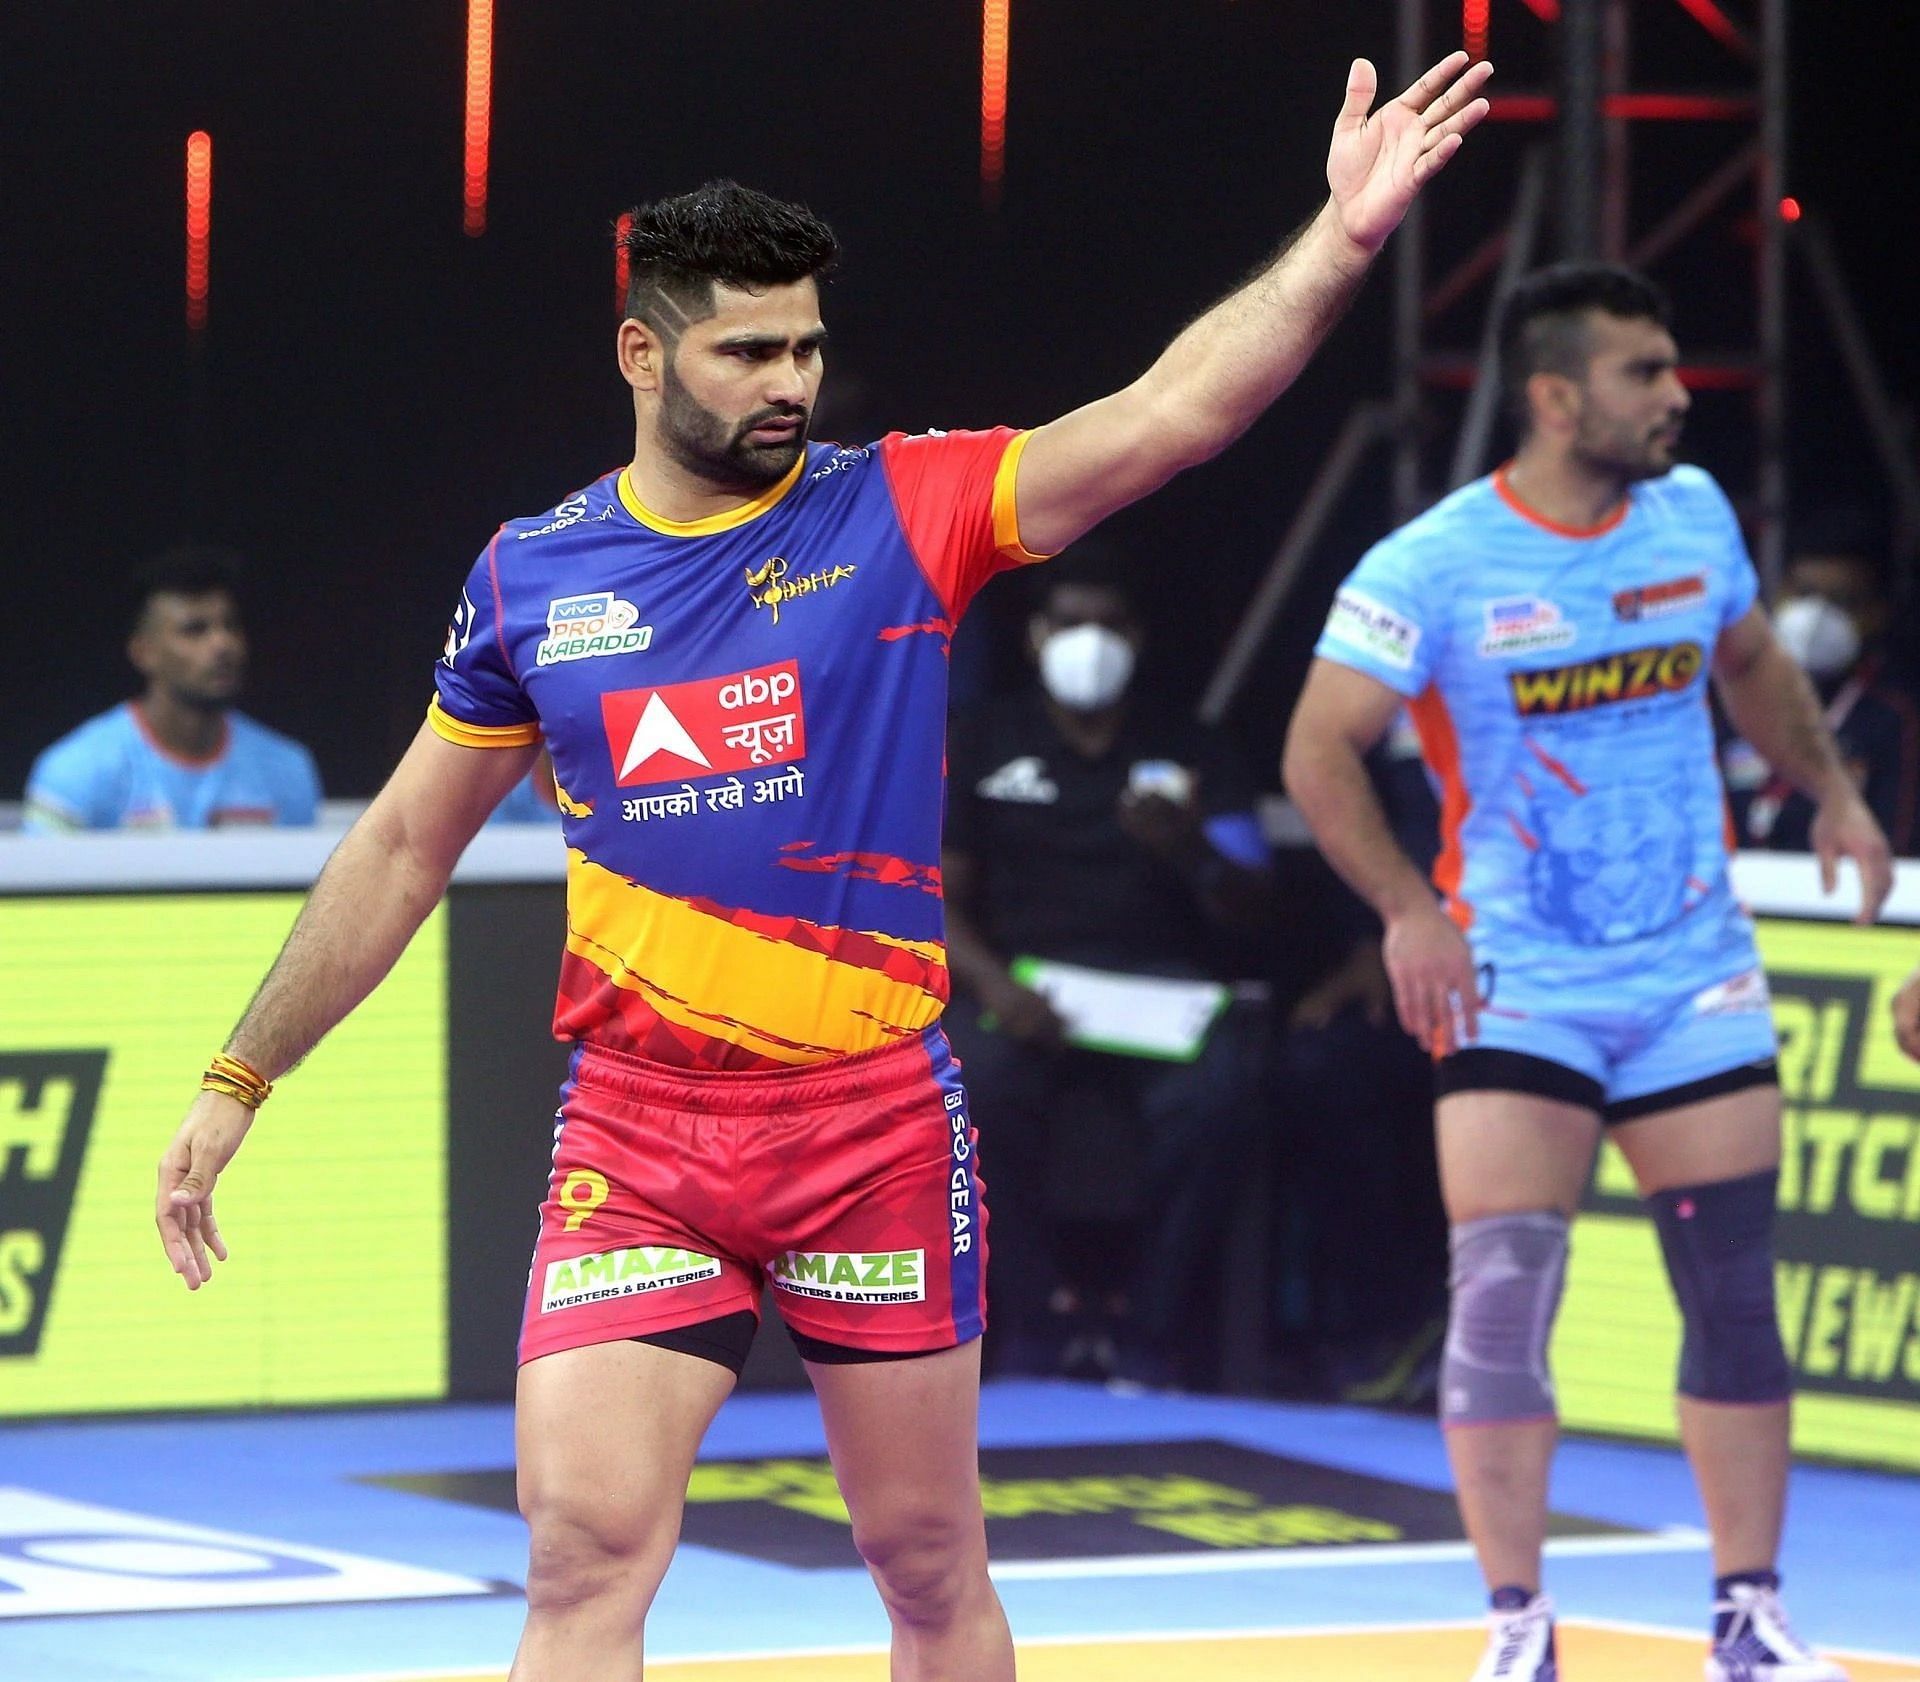 Pardeep Narwal is expected to garner plenty of attention at the Pro Kabaddi League auction.